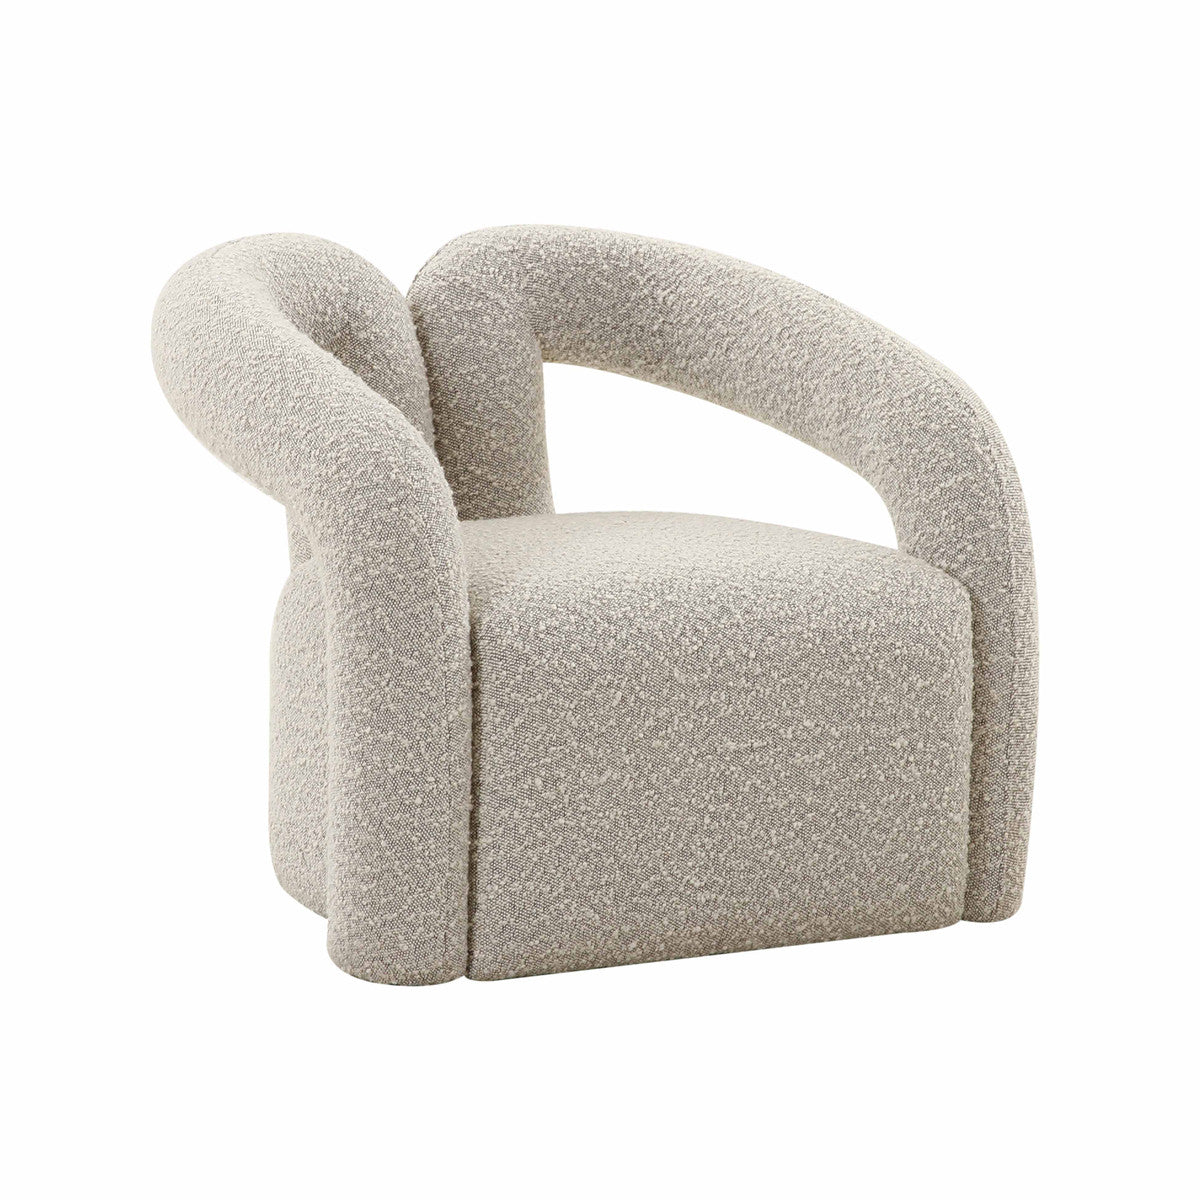 Jenn Speckled Boucle Accent Chair - Be Bold Furniture